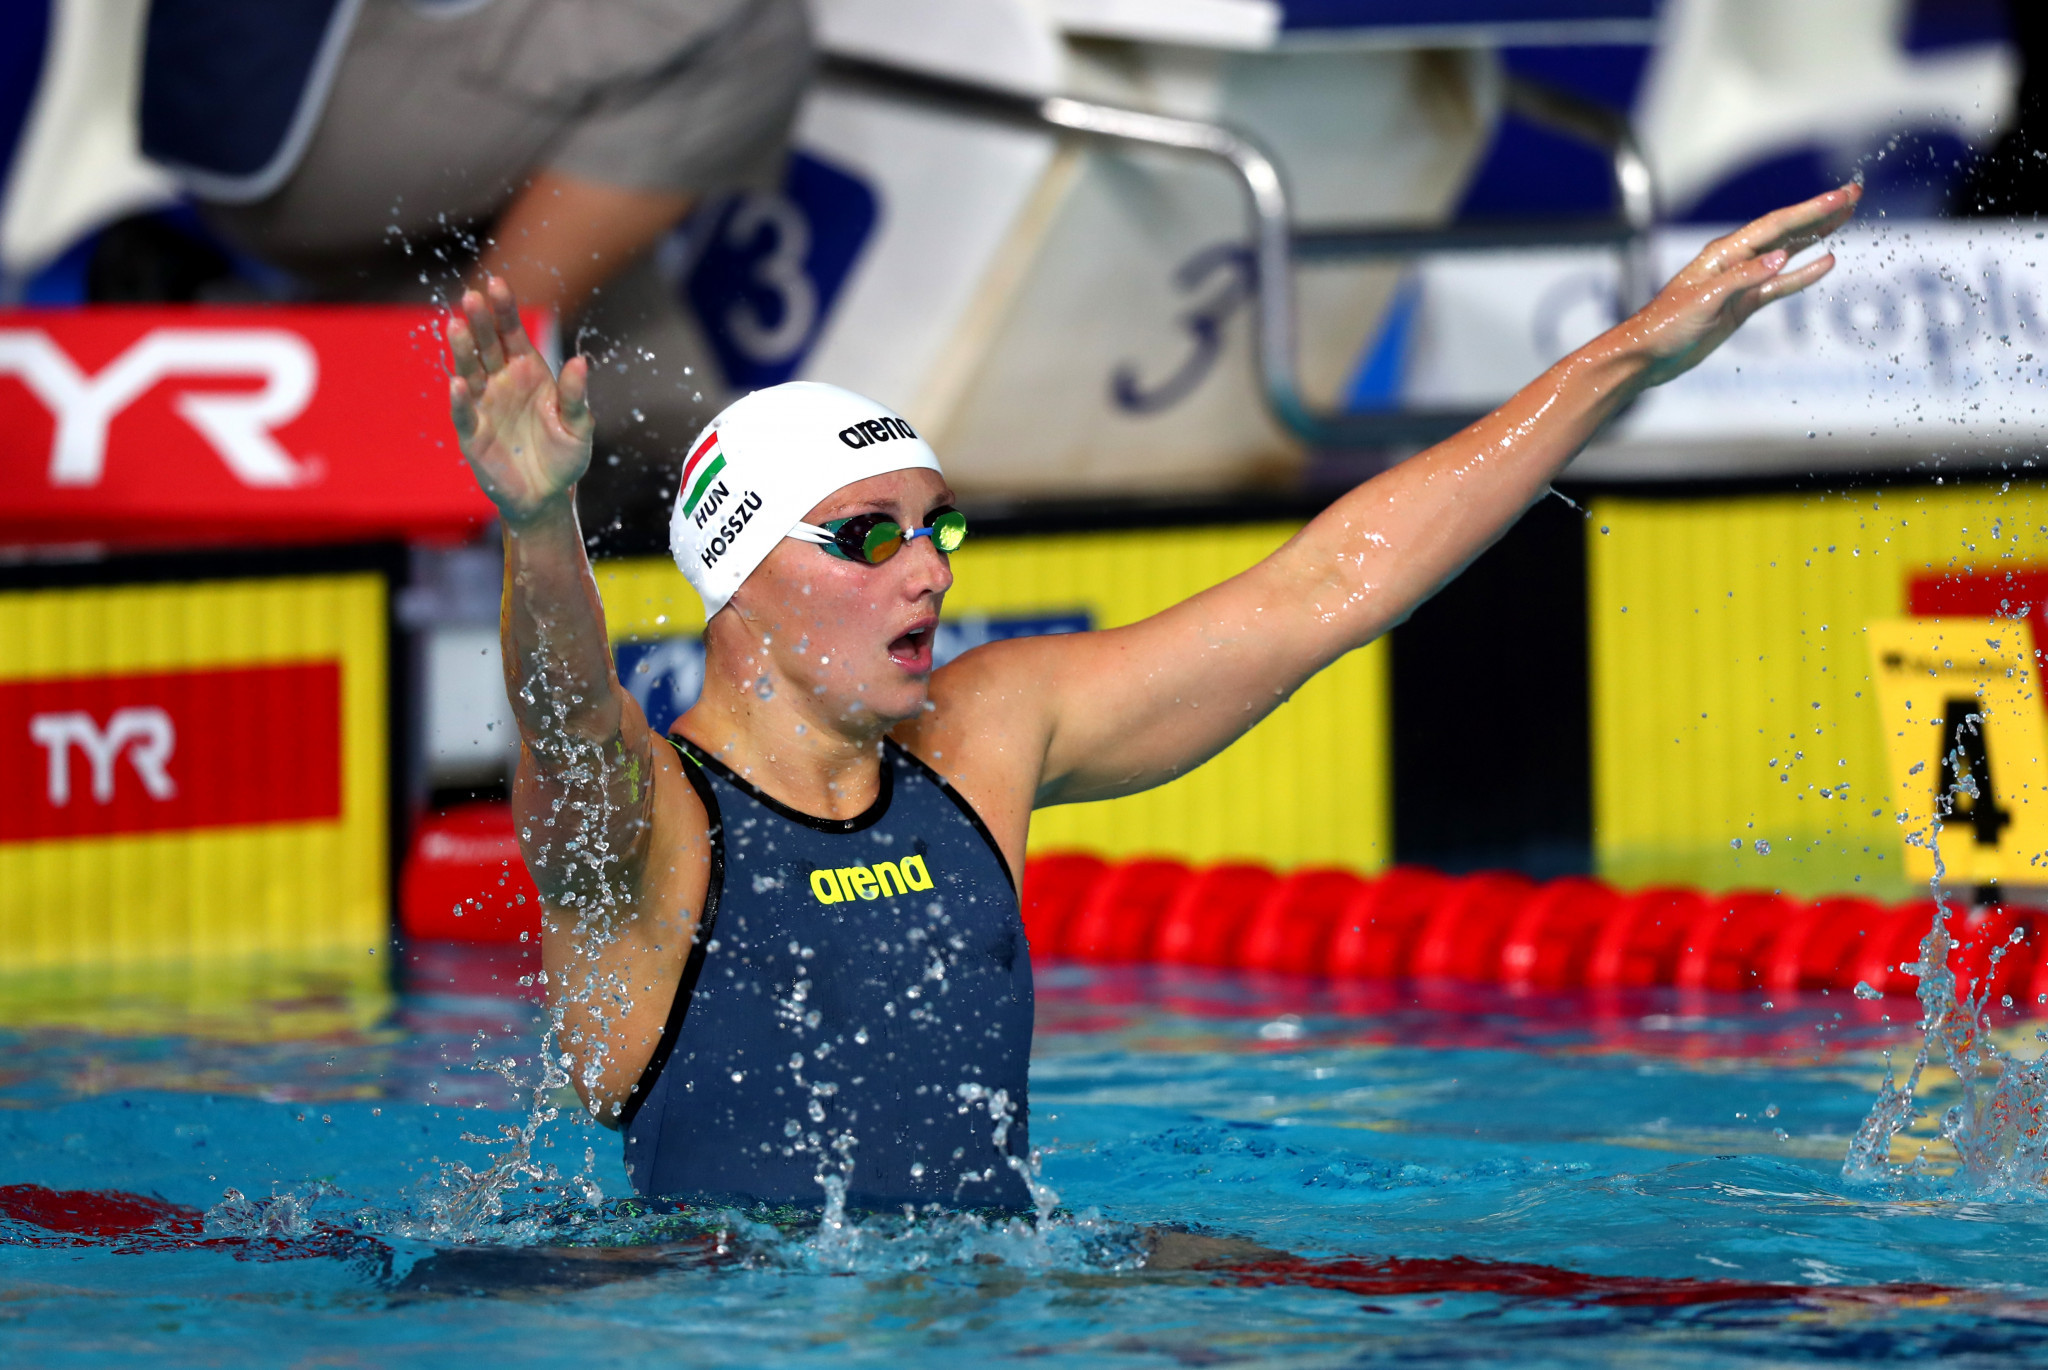 Katinka Hosszu won the women's 200m individual medley for the fifth straight European Championships ©Getty Images